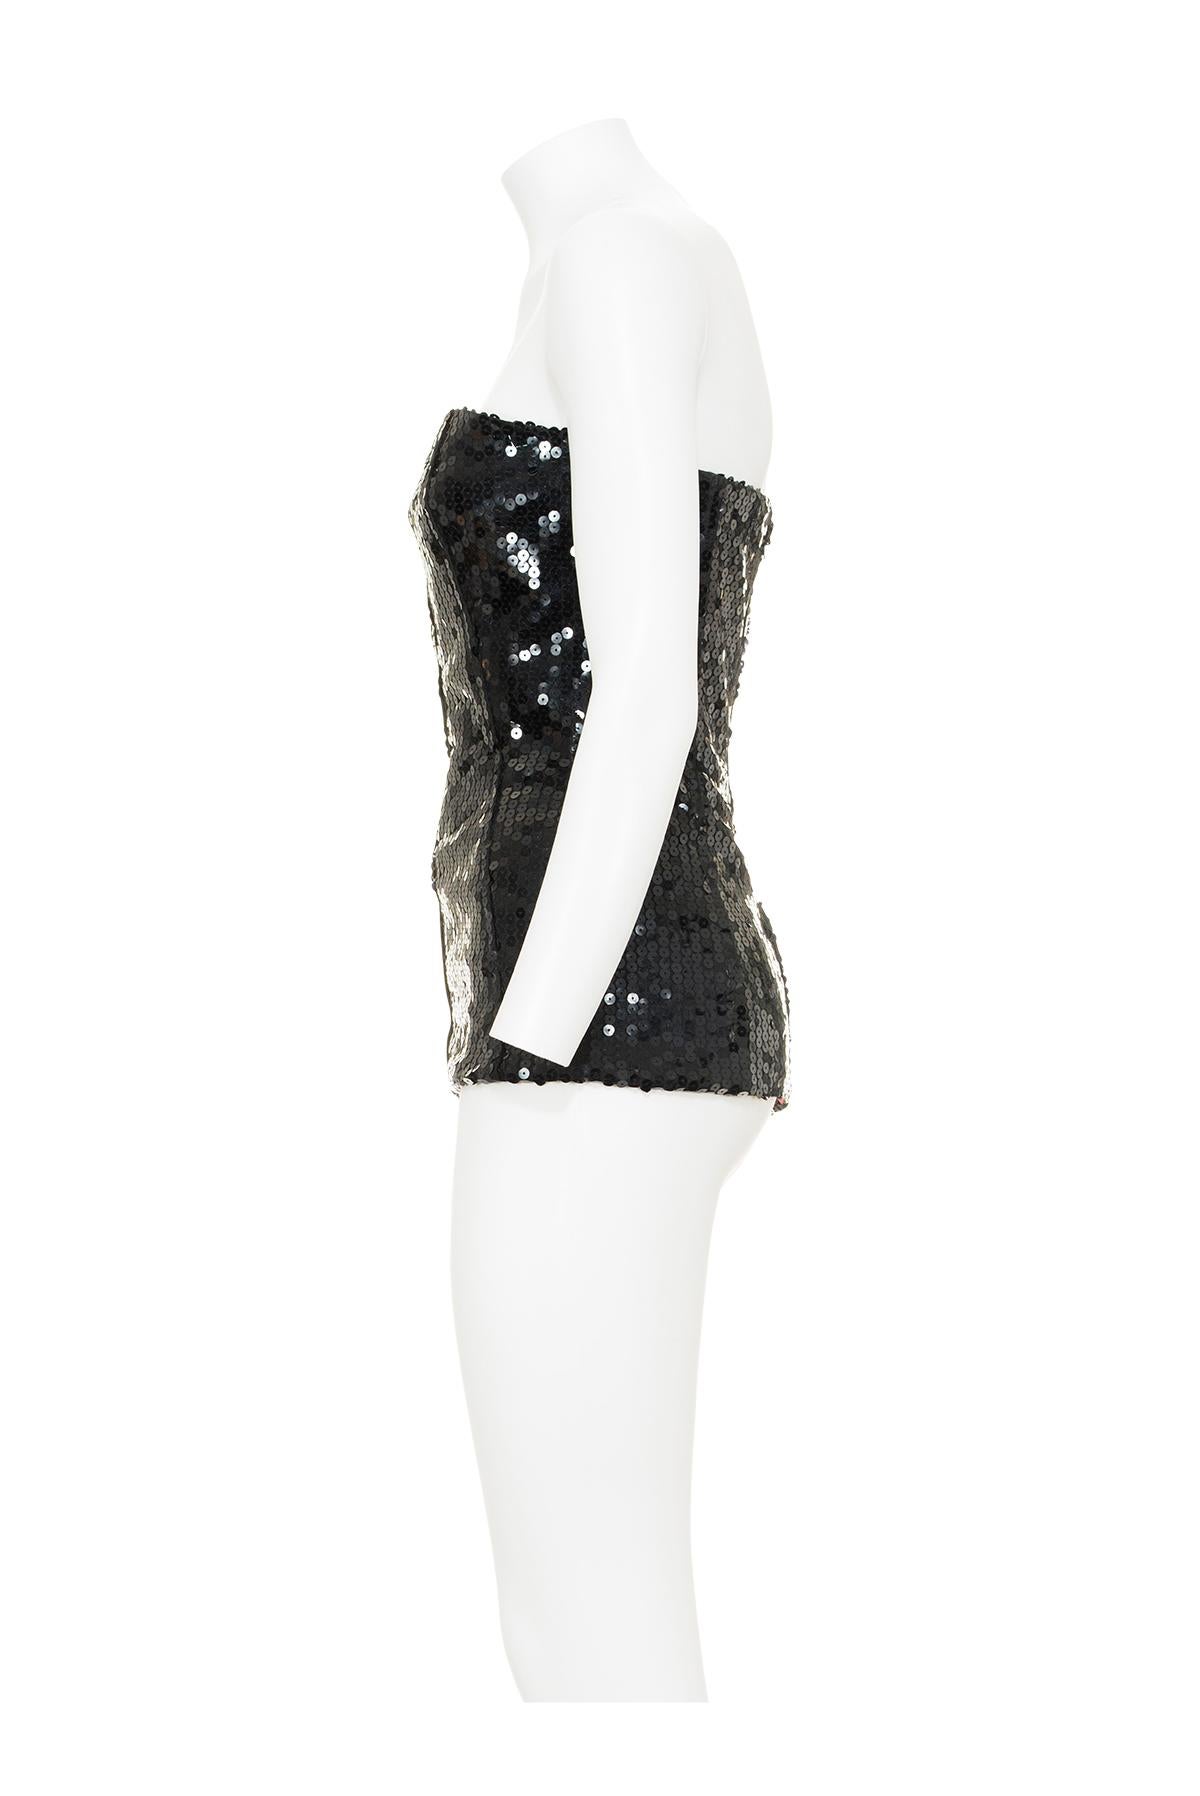 Iconic strapless black sequins bustier top from the 1998 Fall Winter 